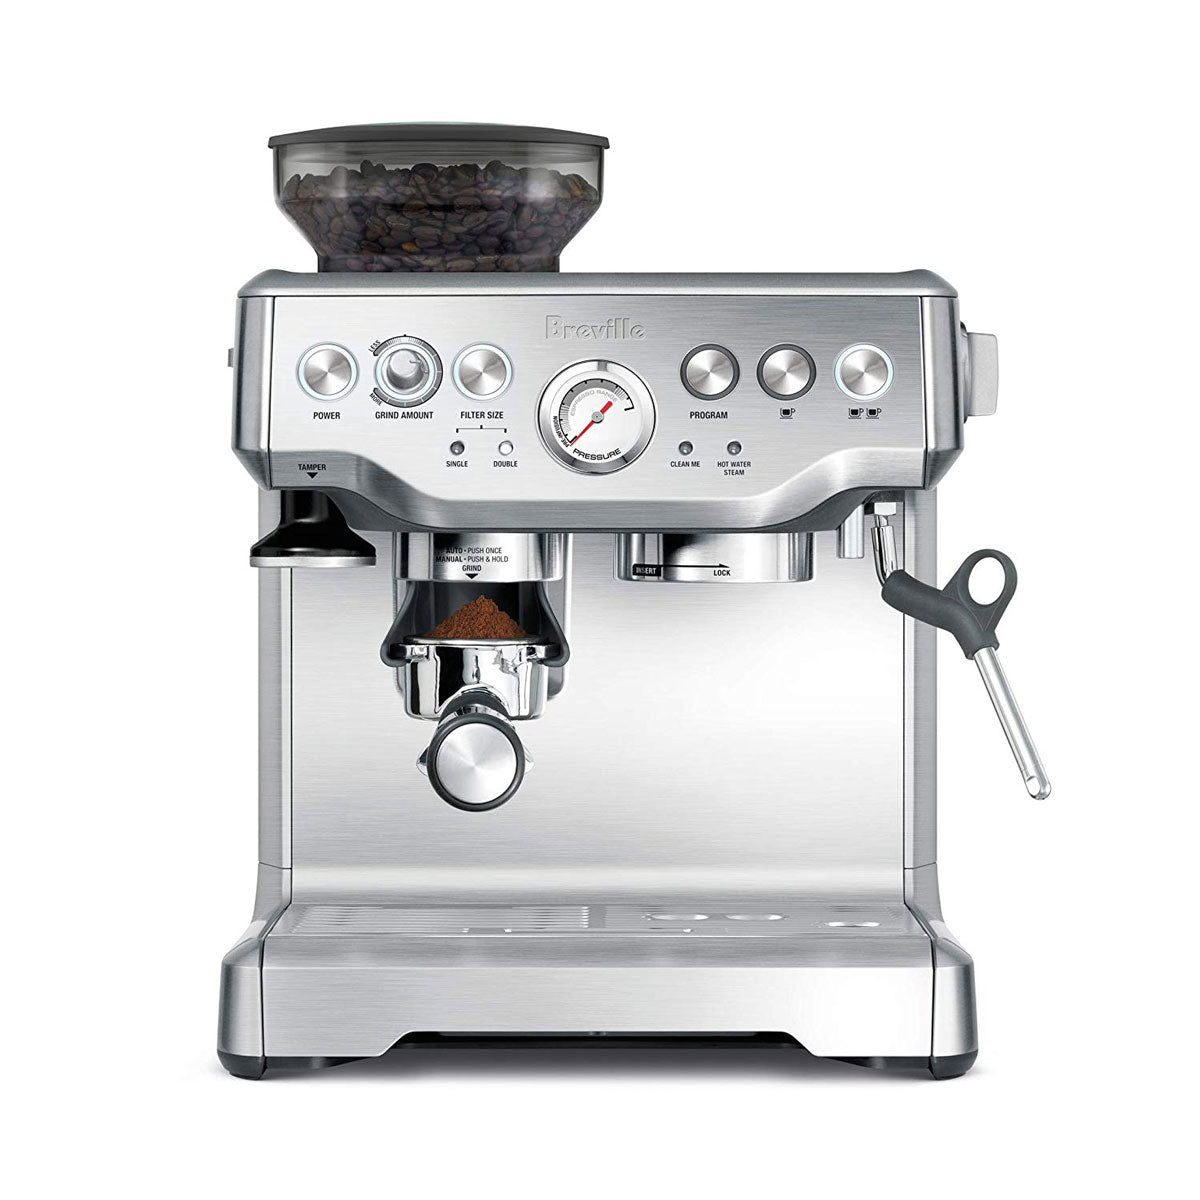 Espresso machine for home use, its esthetic is reminiscent of old machines with an industrial aspect (Photo: Breville)